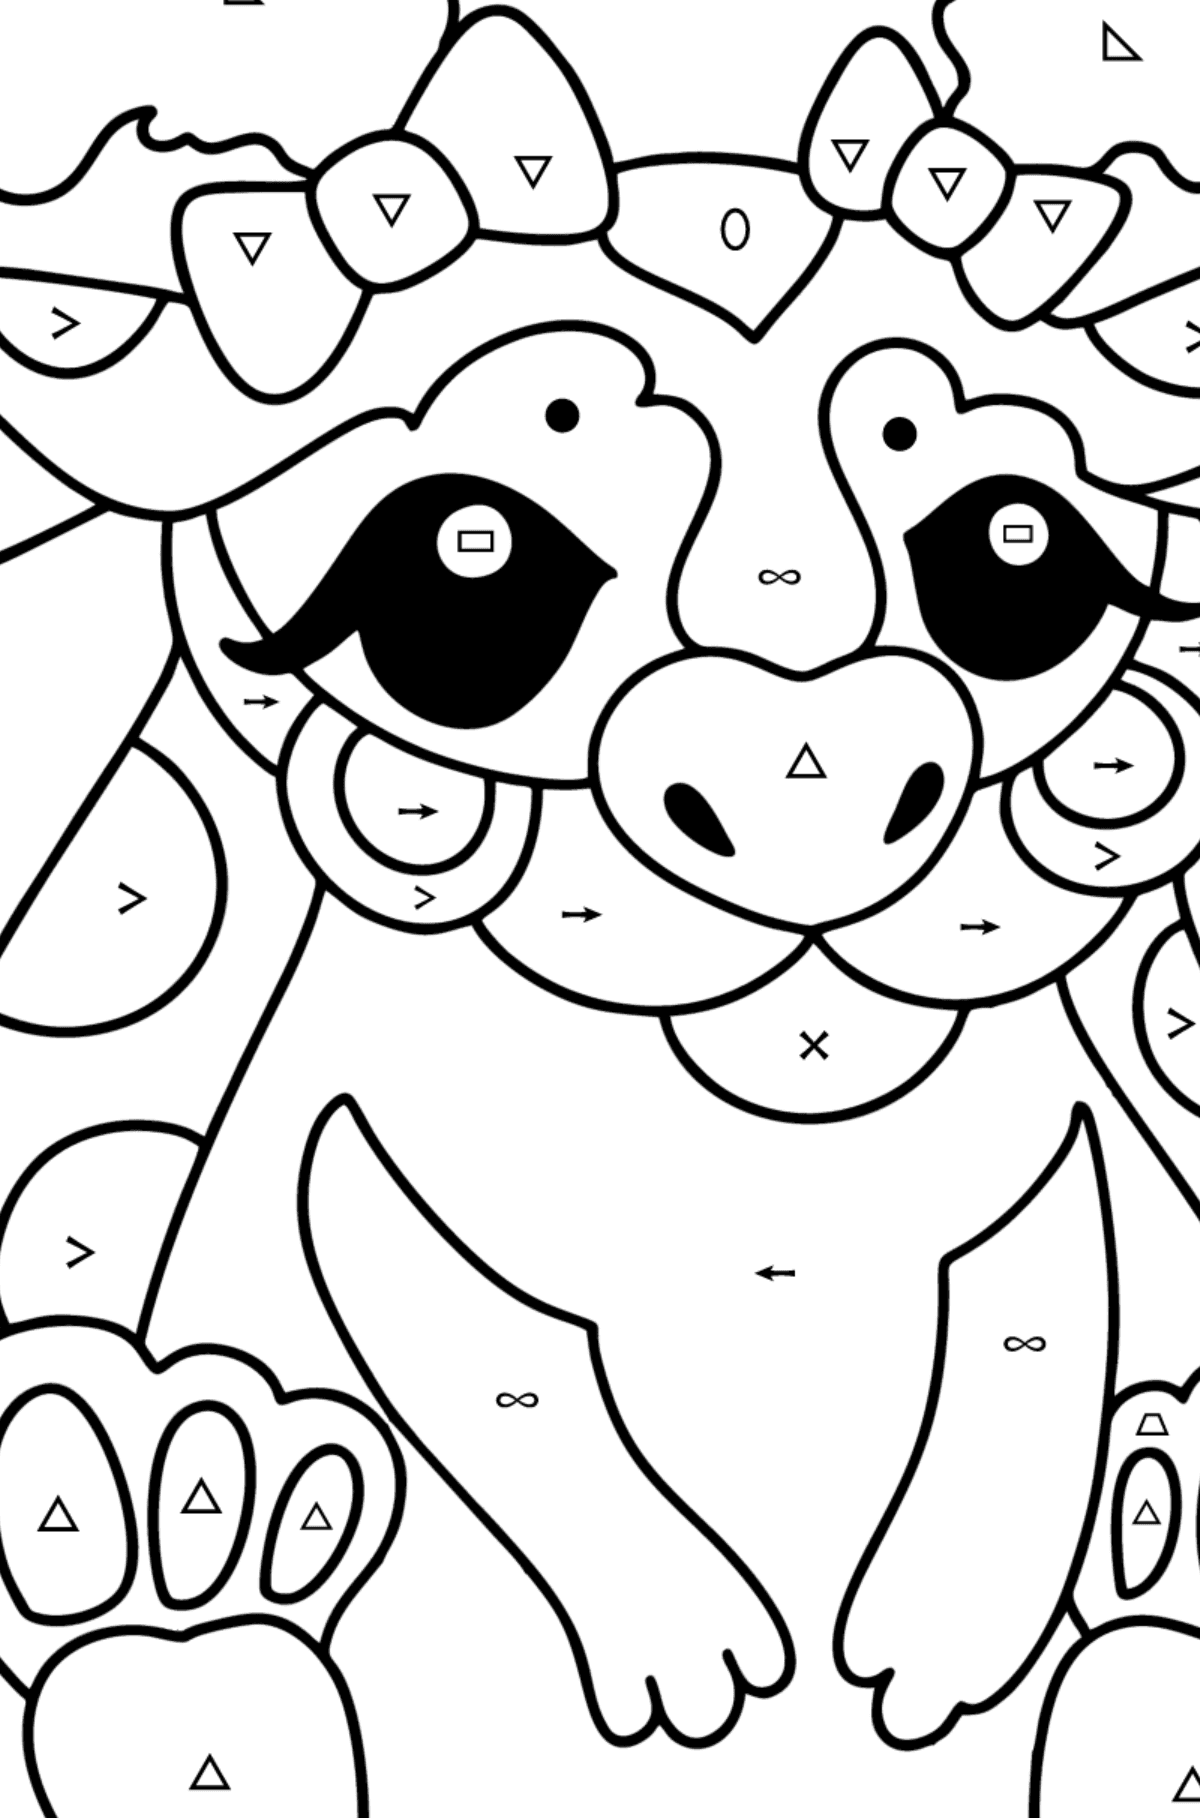 Dragon girl coloring page - Coloring by Symbols and Geometric Shapes for Kids